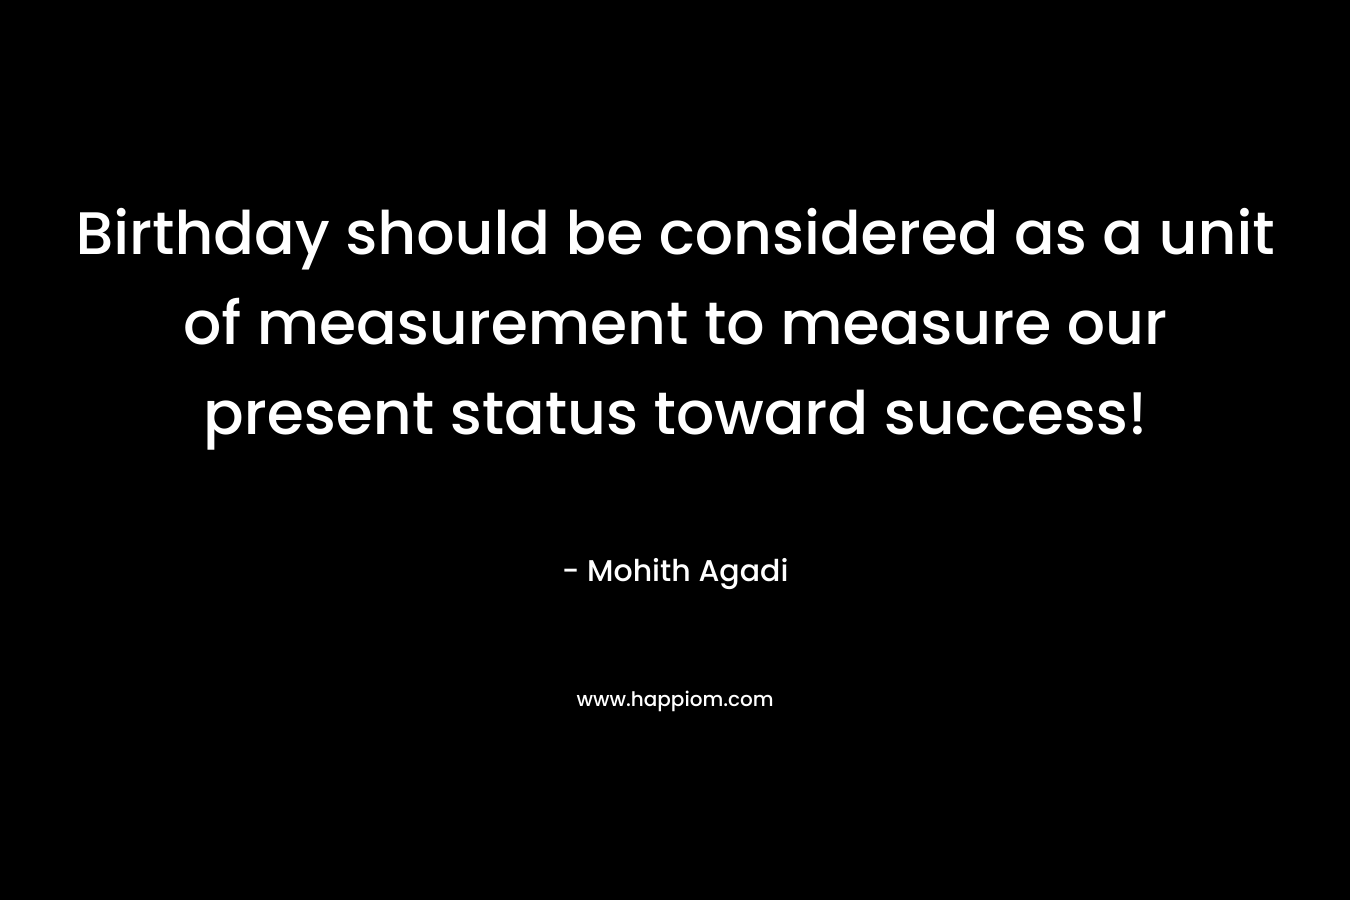 Birthday should be considered as a unit of measurement to measure our present status toward success!